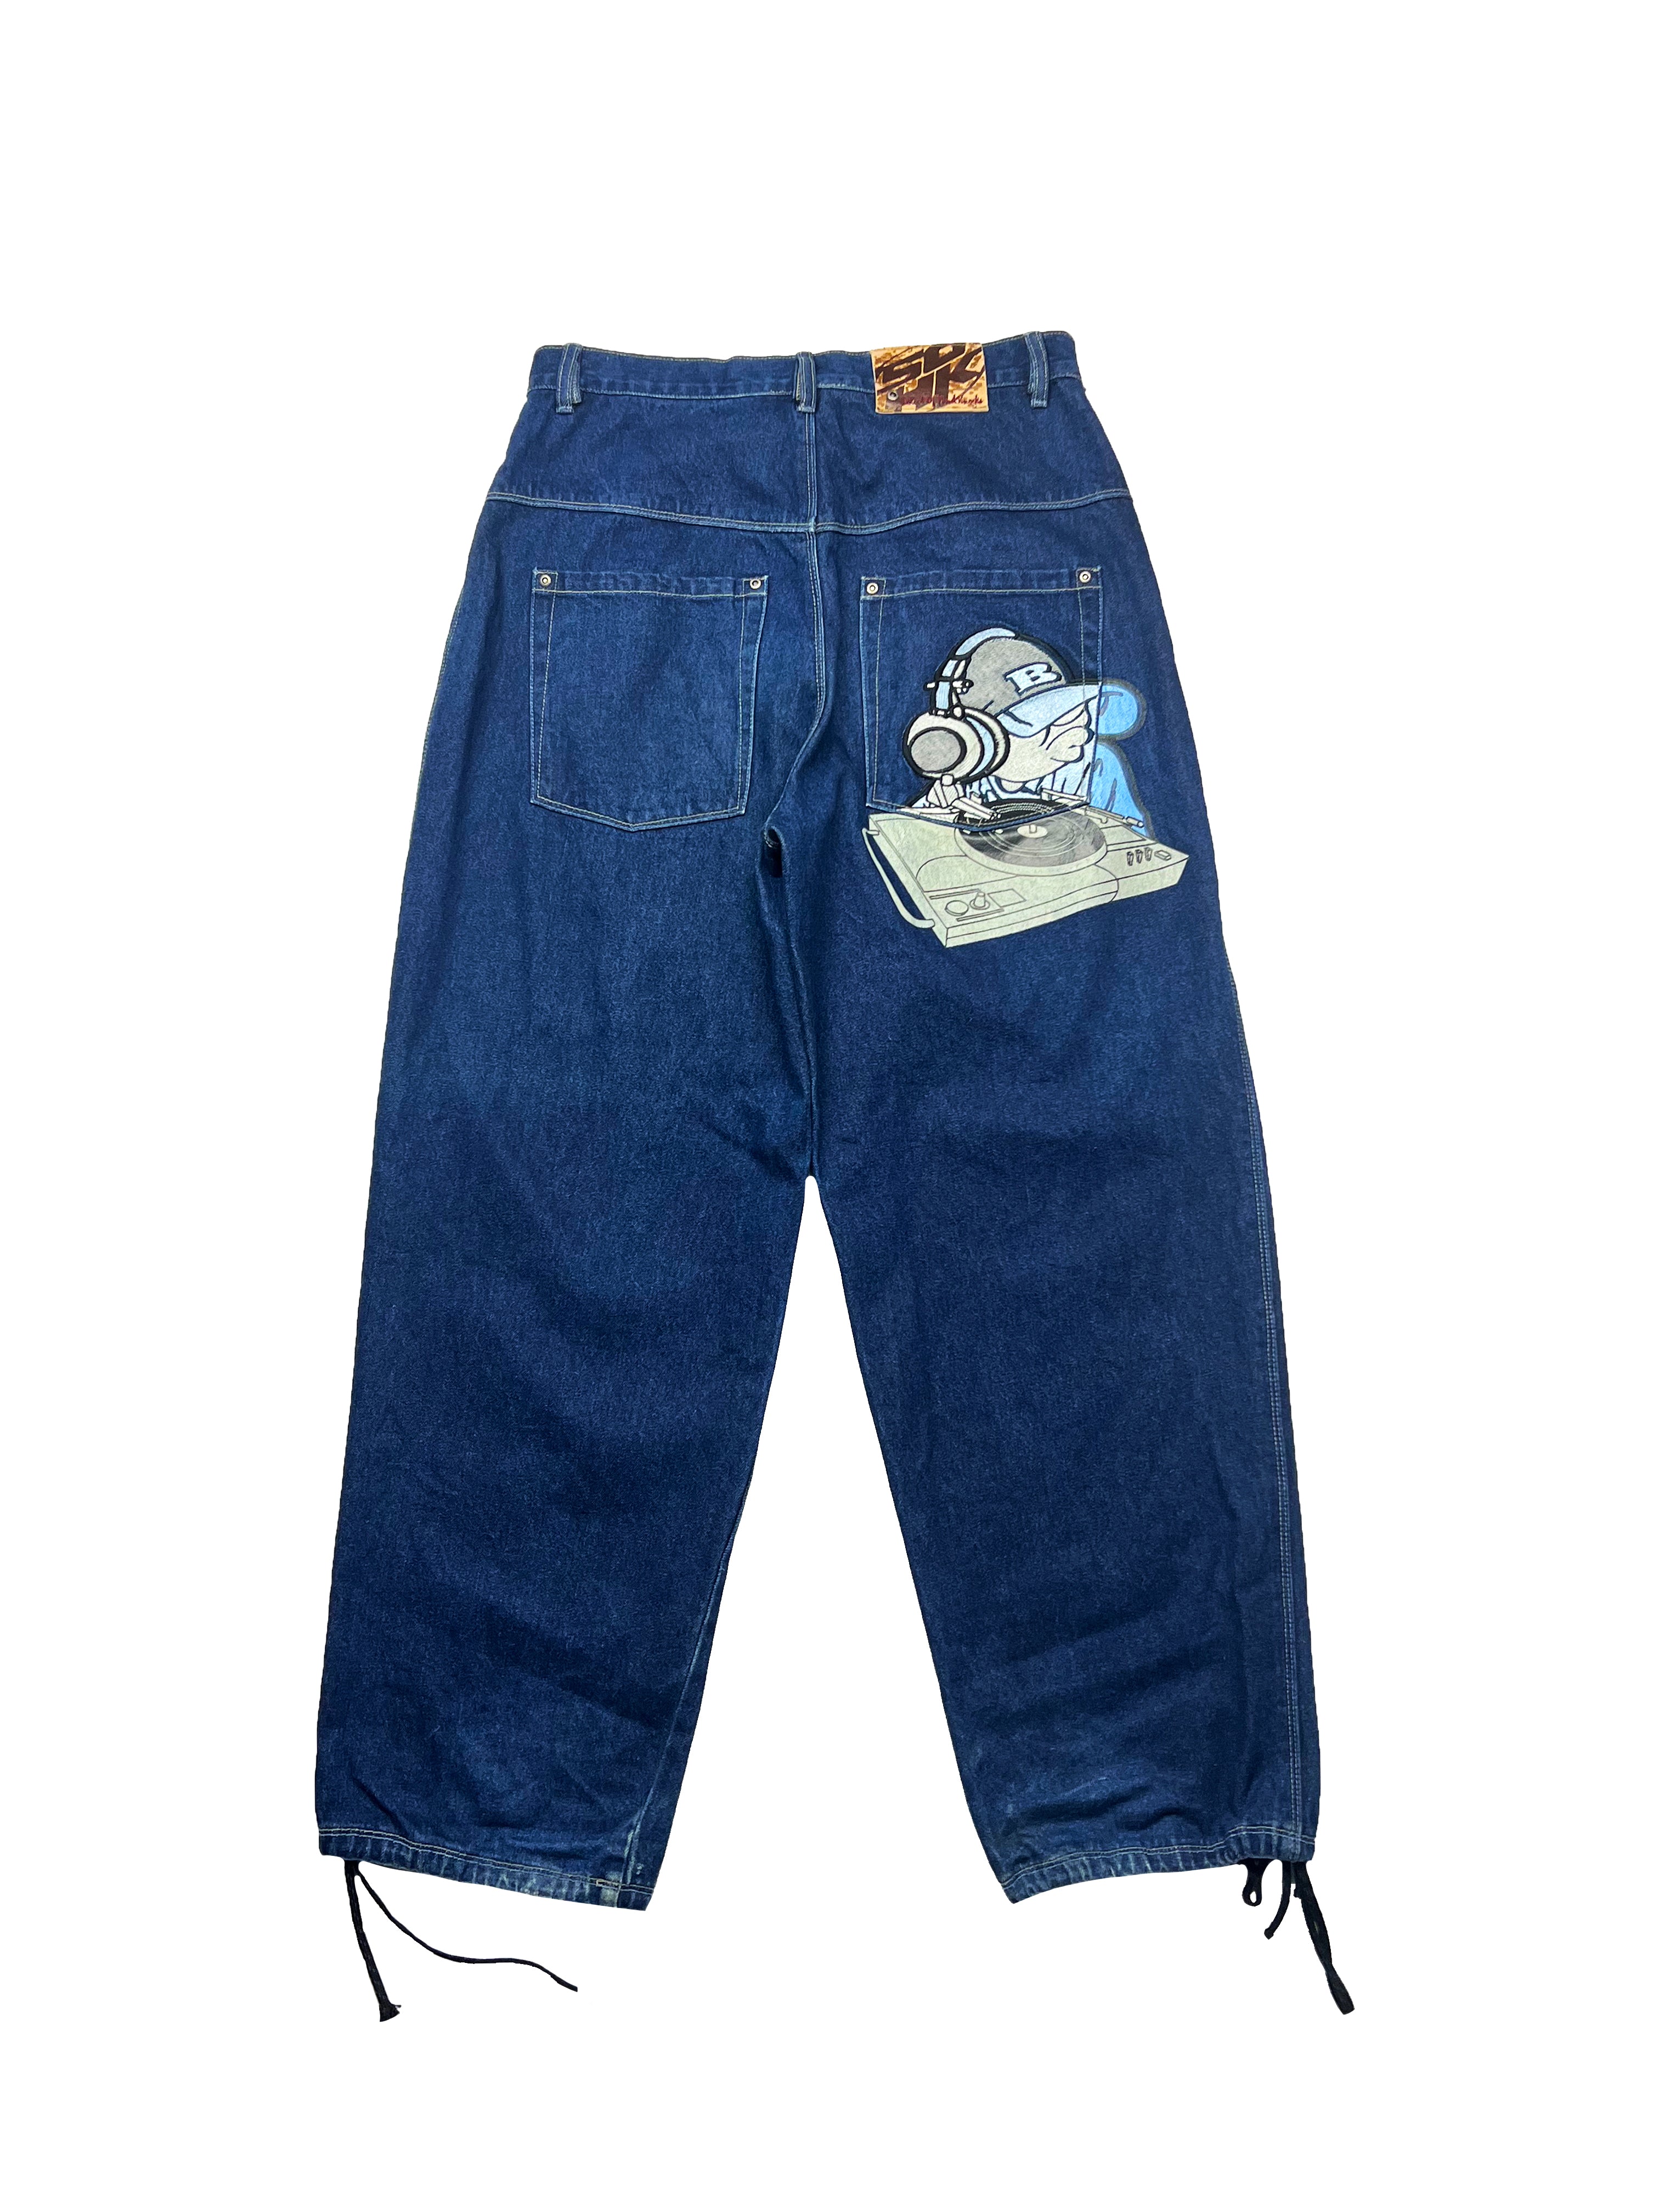 School Of Hard Knock Character Jeans 90's